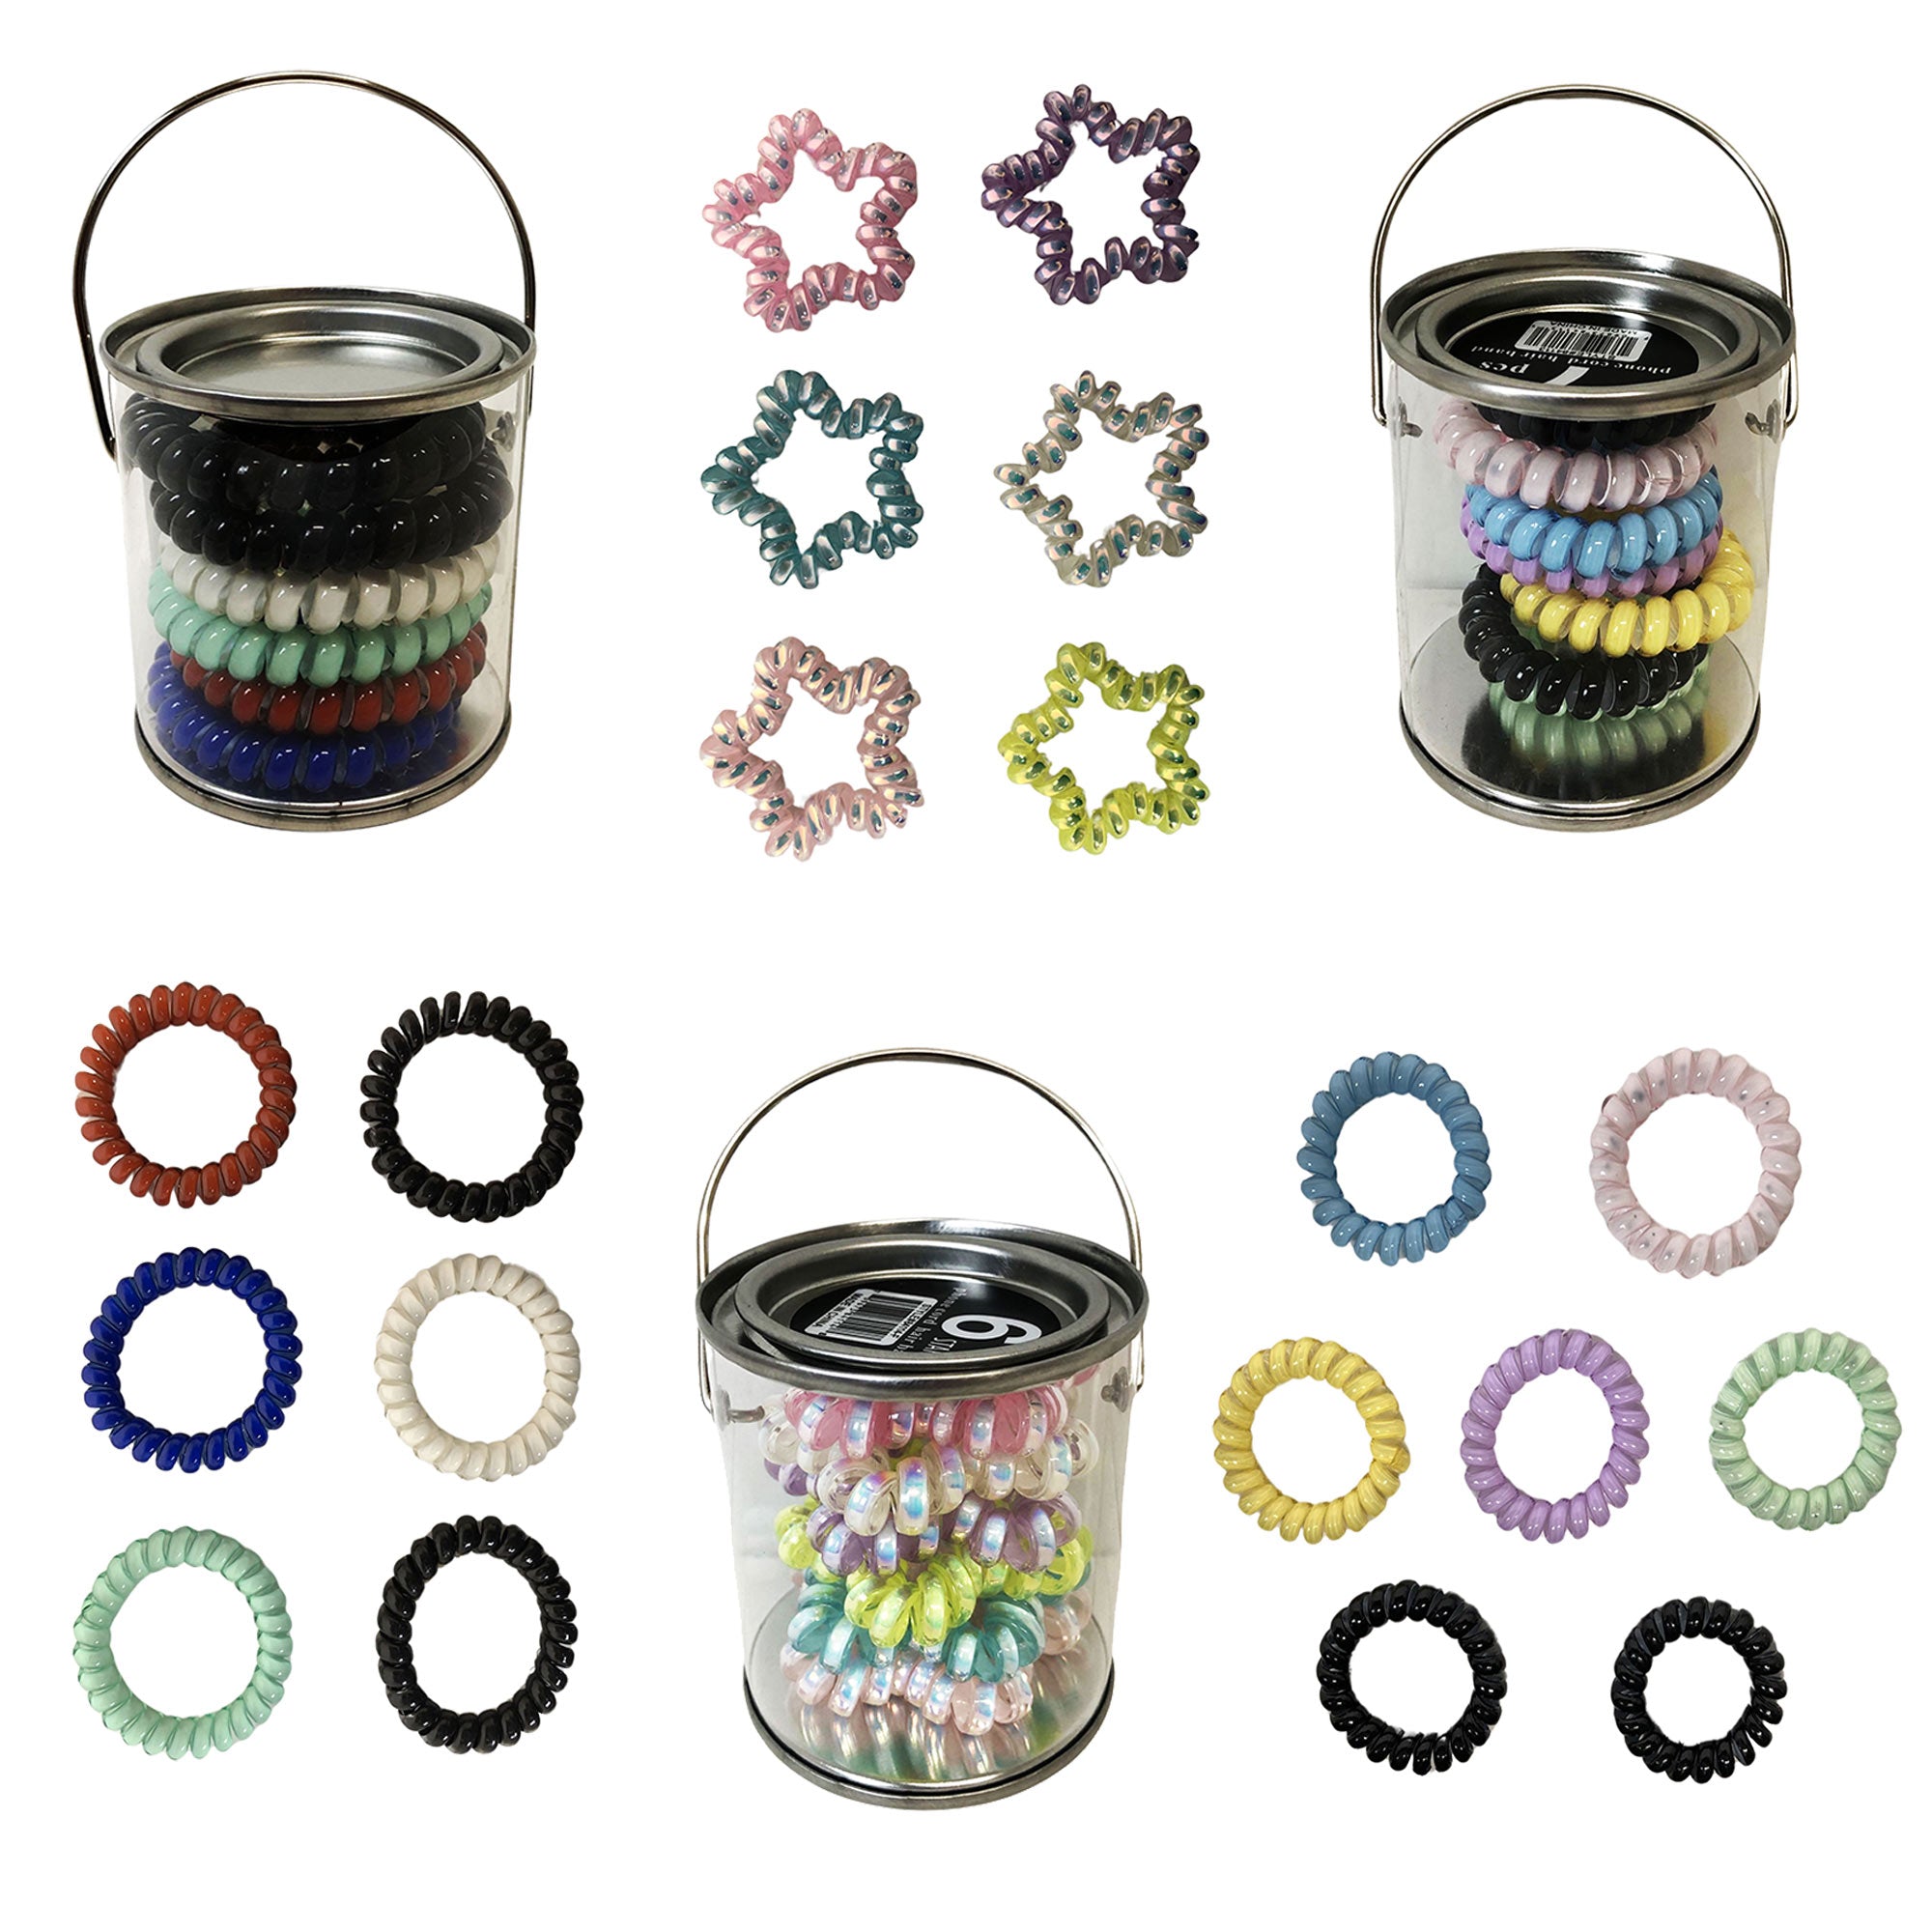 CLEARANCE CORDED HAIR TIES ASSORTED (CASE OF 36 - $2.00 / PIECE)  Wholesale Hair Ties SKU: CORDED-HAIR-TIES-ASSORTED-36